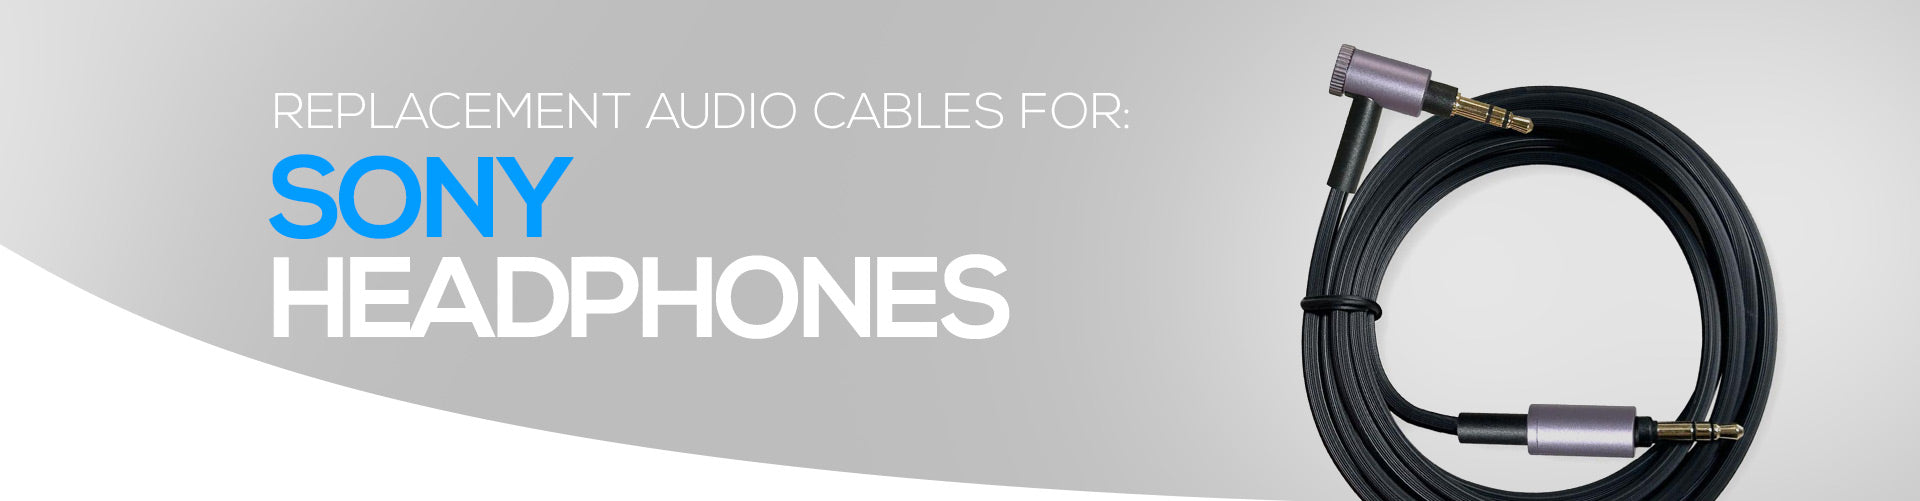 Audio Cables For Sony Headphones